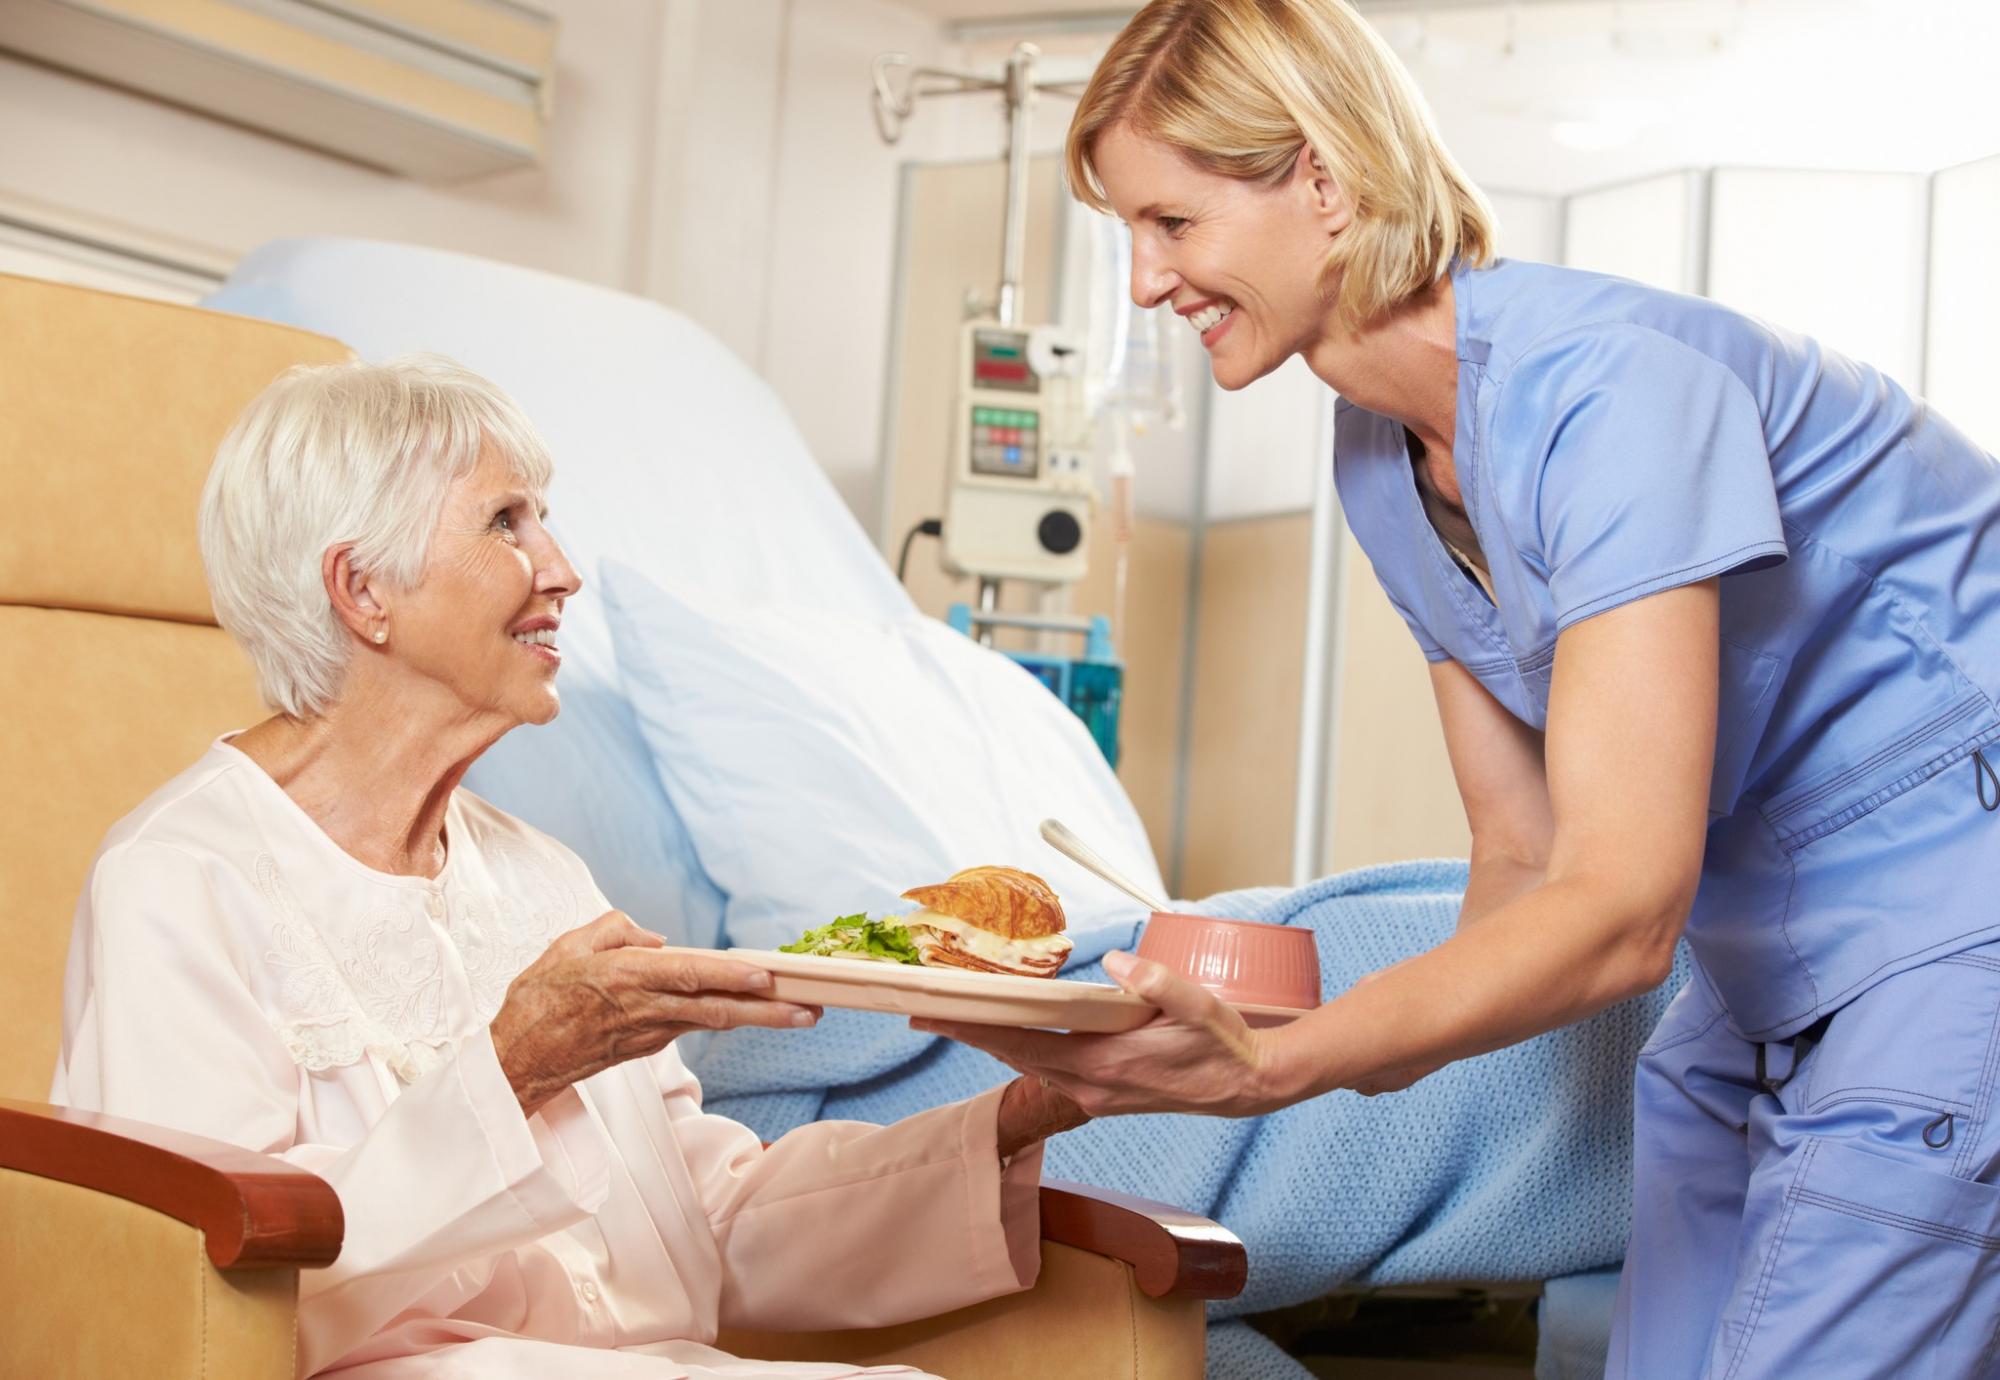 Hospital patient with food 